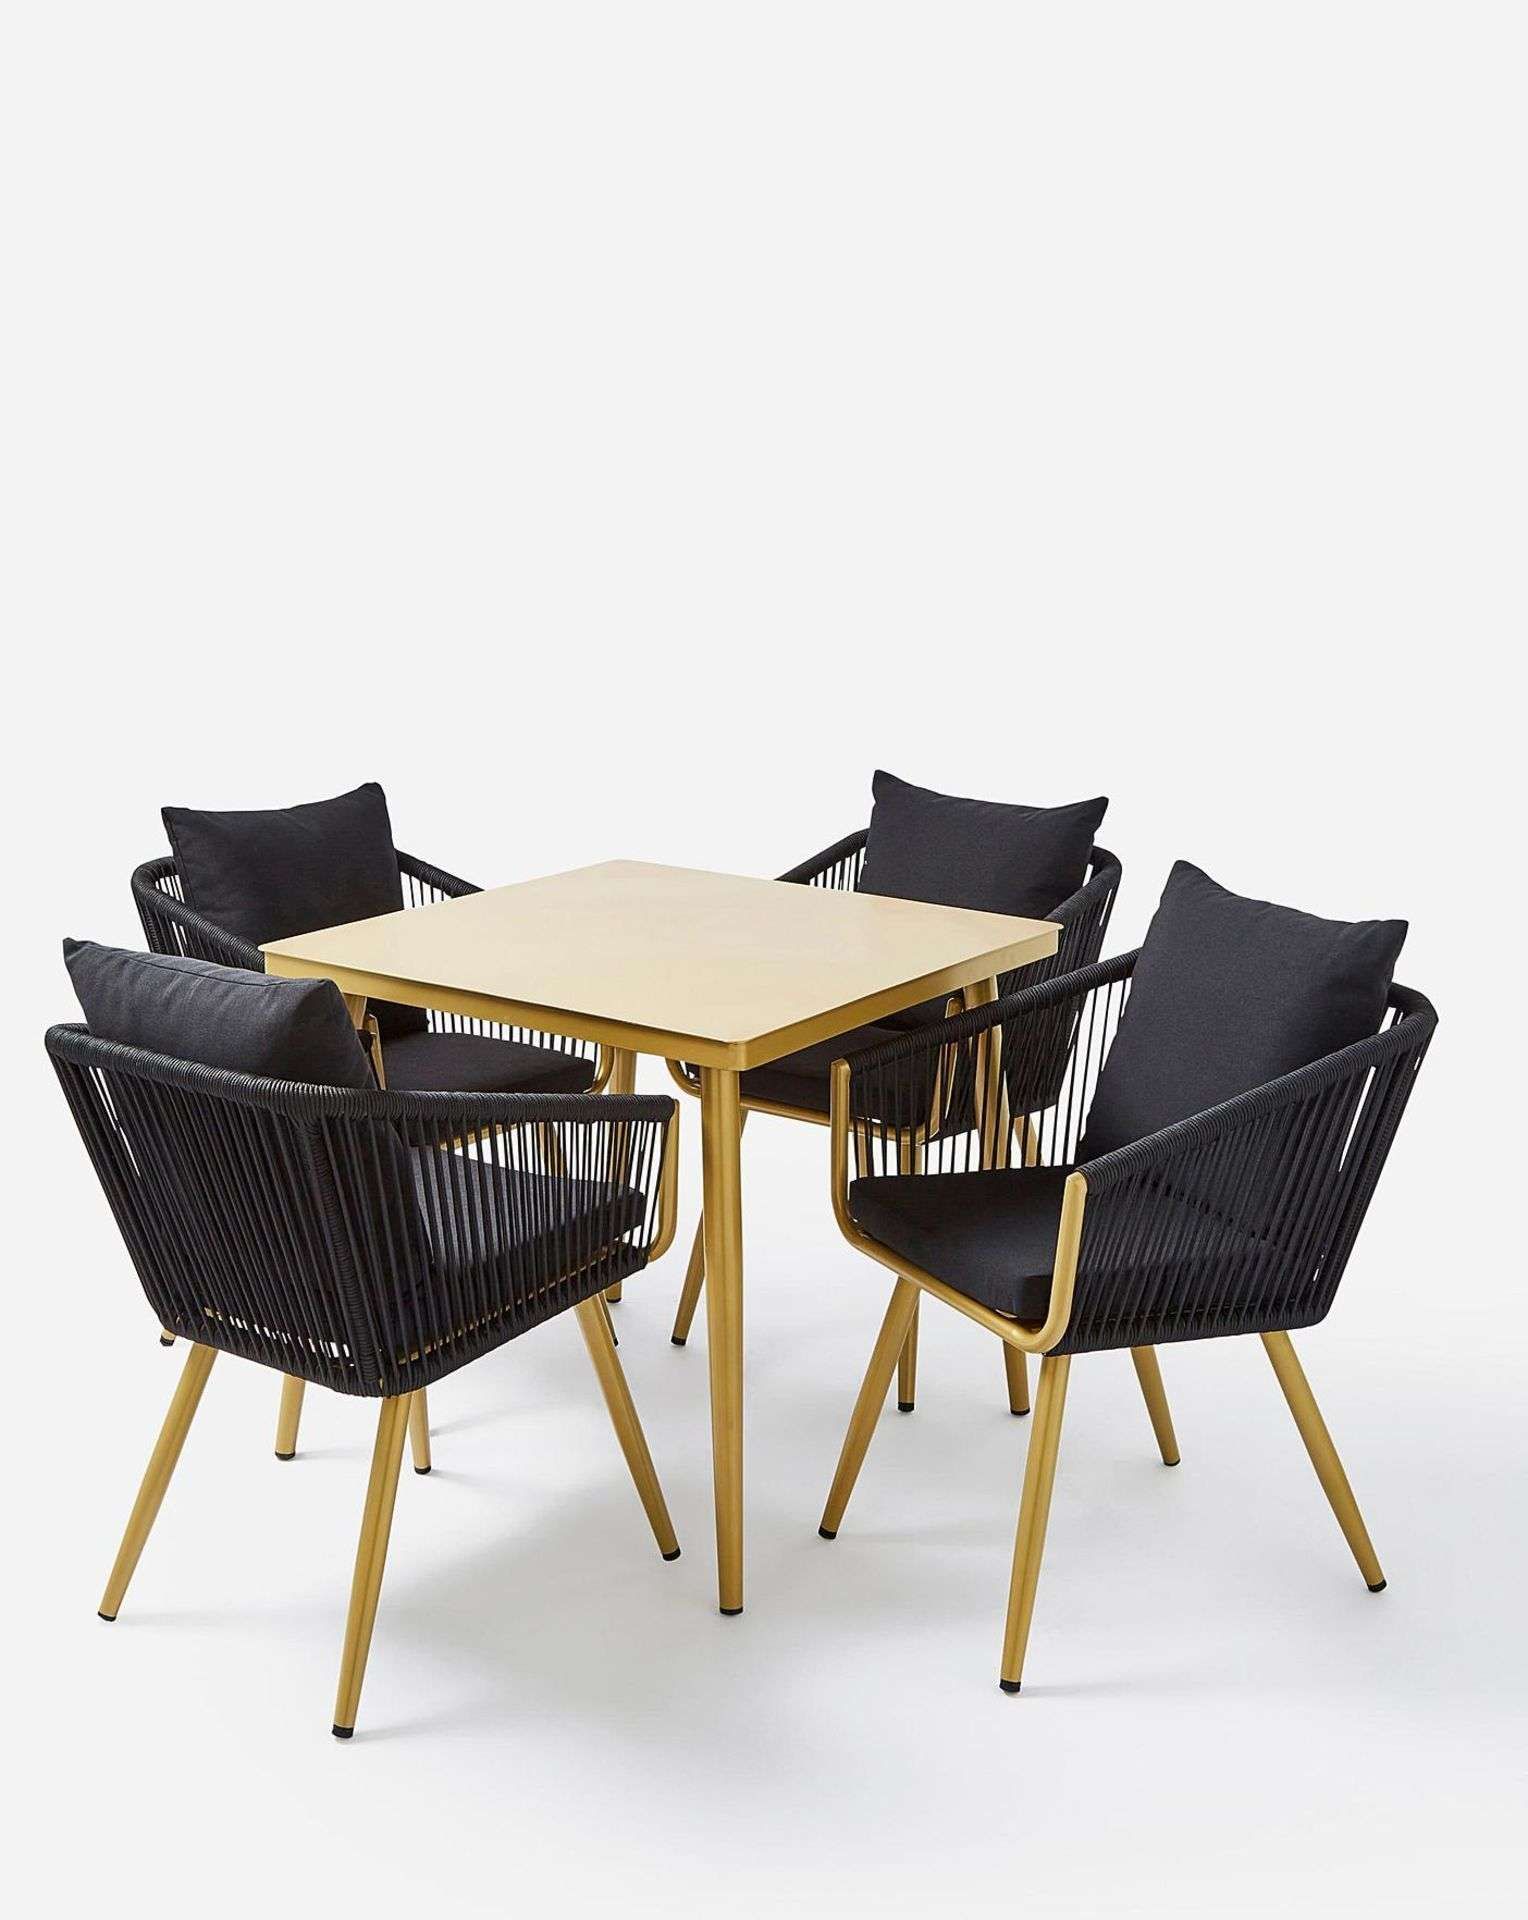 Trade Lot 4 x New & Packaged Joanna Hope Naya 4 Seater Dining Sets. RRP £719 each. This Exclusive - Bild 4 aus 5